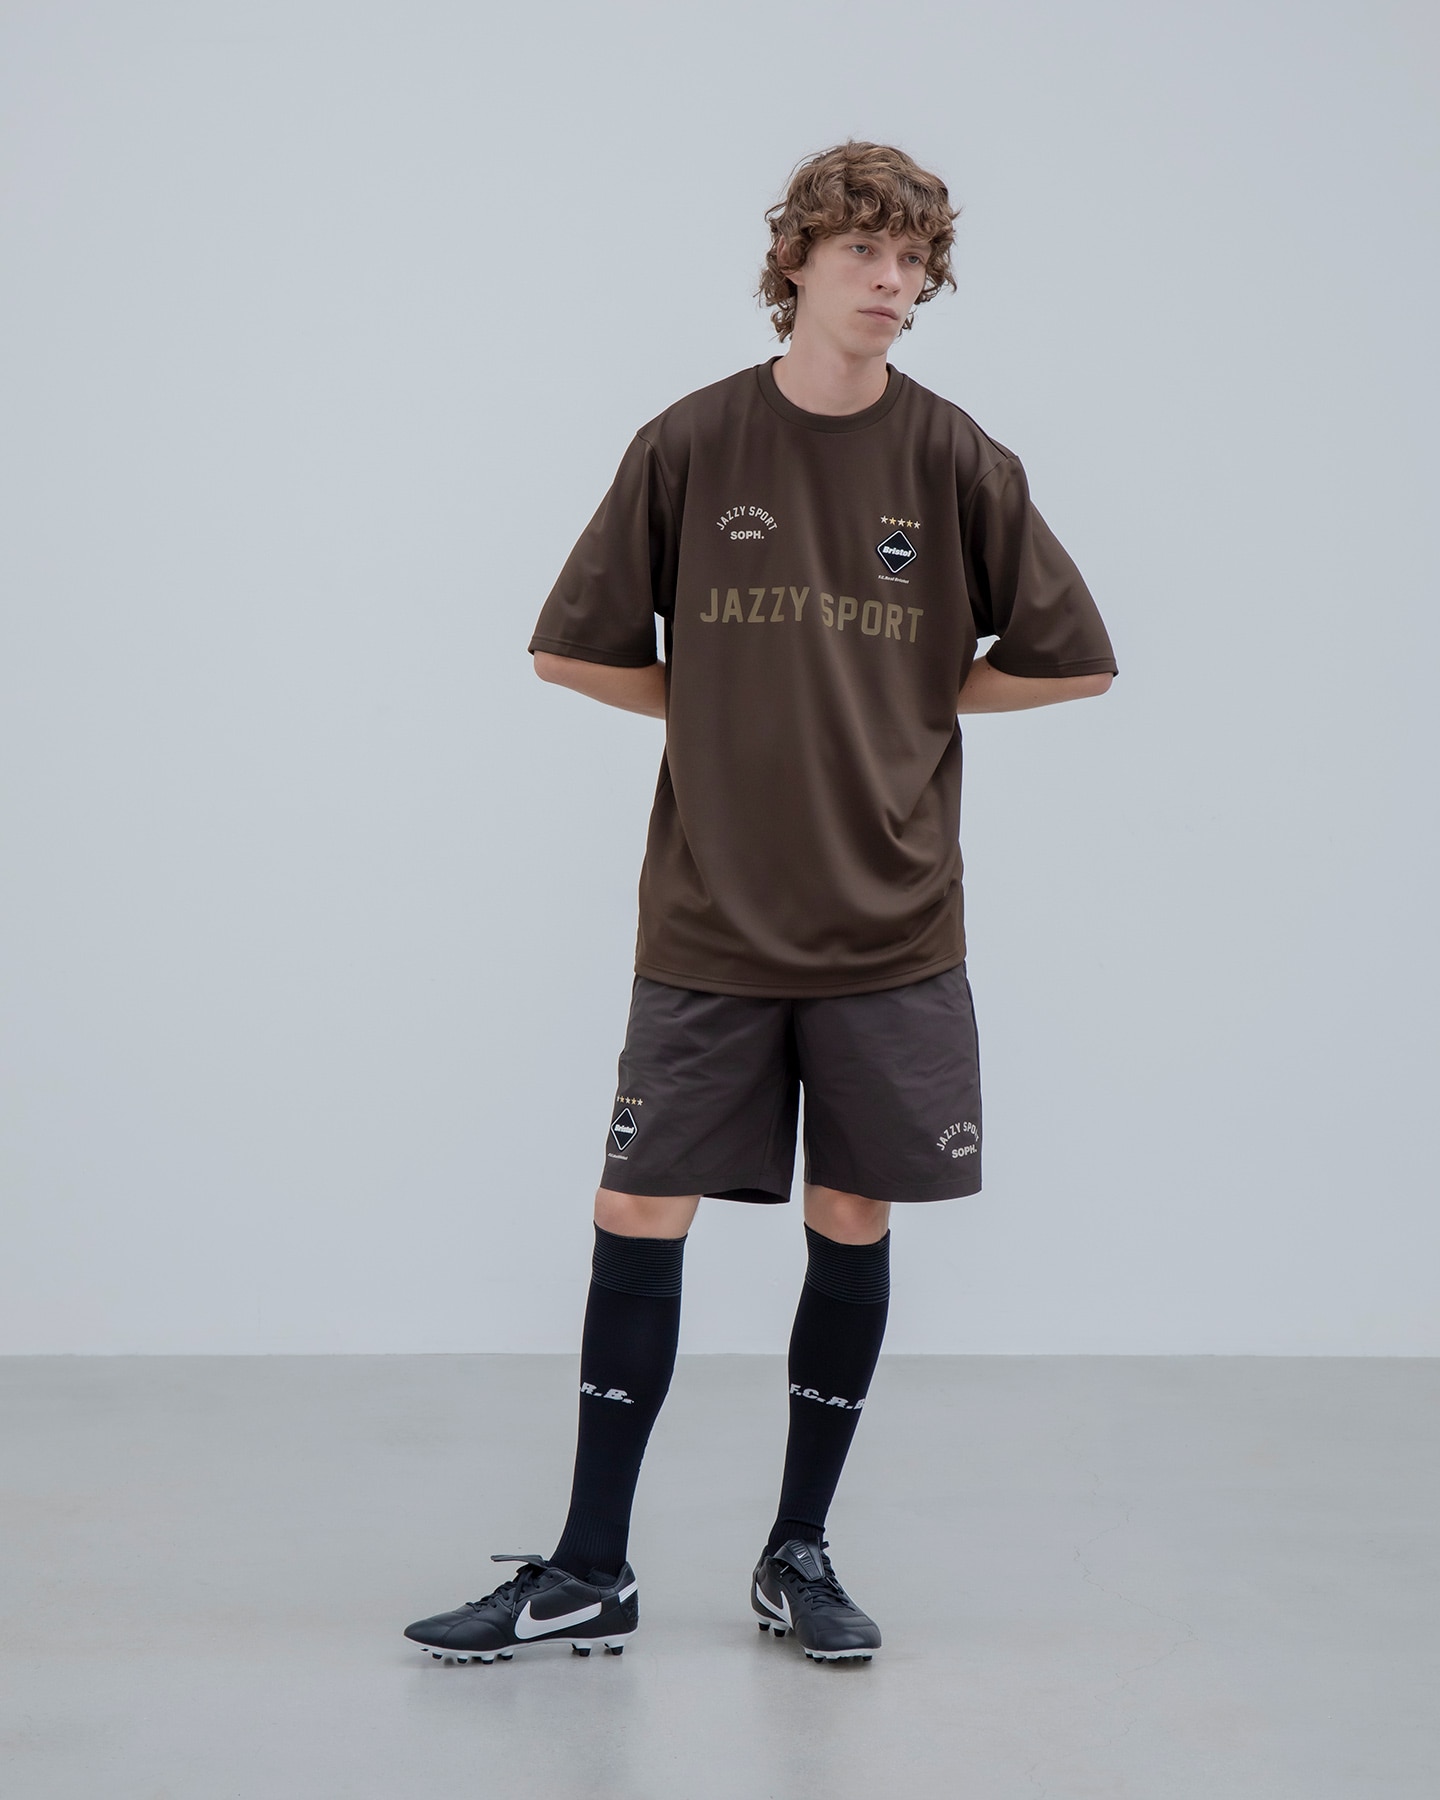 FCRB GAME SHIRTS  サイズS サッカー NIKE FC